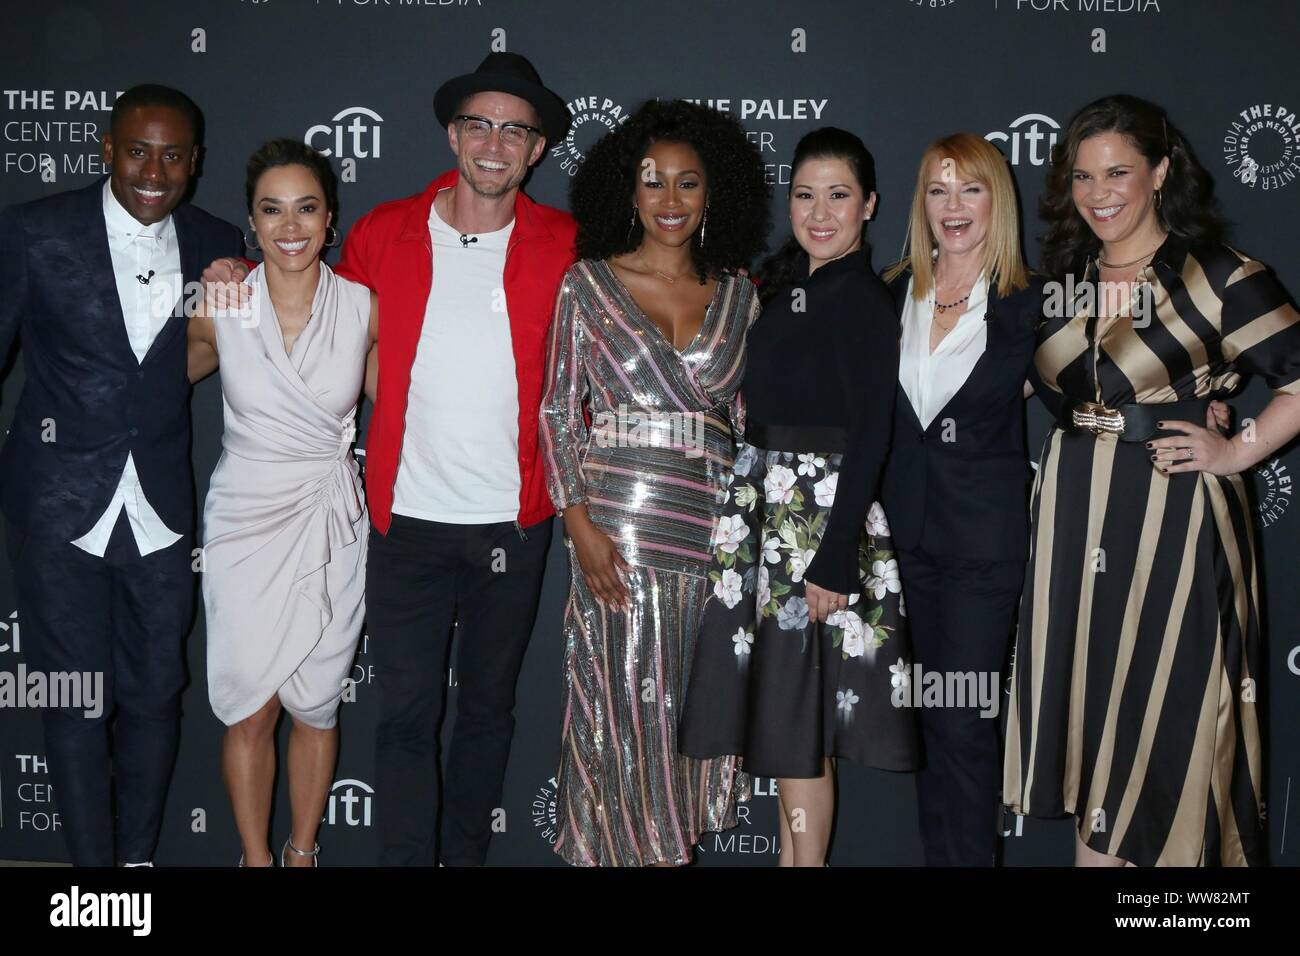 All Rise Cast, J. Alex Brinson, Jessica Camacho, Wilson Bethel, Simone Missick, Ruthie Ann Miles, Marg Helgenberger, Lindsay Mendez at arrivals for PaleyFest Fall TV Previews: CBS Presents ALL RISE and BOB HEARTS ABISHOLA, Paley Center for Media, Beverly Hills, CA September 12, 2019. Photo By: Priscilla Grant/Everett Collection Stock Photo